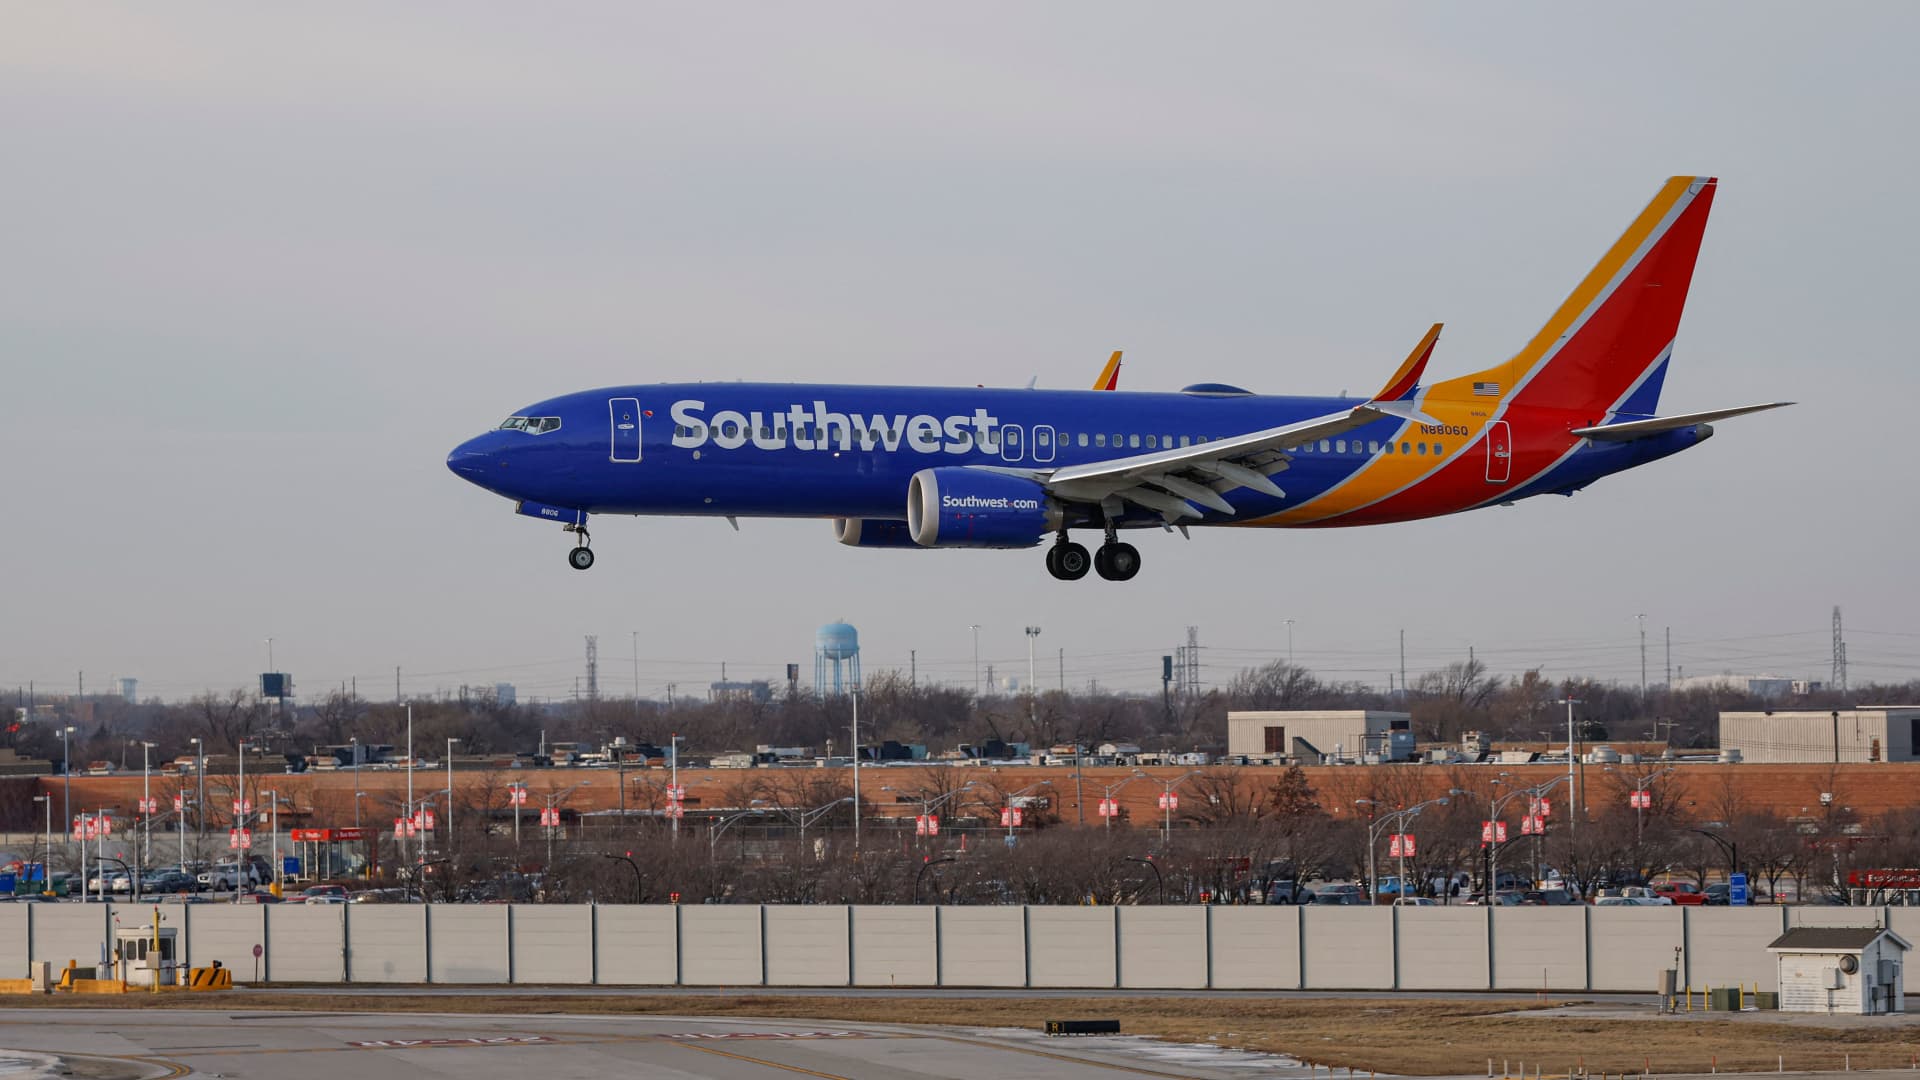 DOT is probing whether Southwest’s schedules were ‘unrealistic’ during holiday meltdown